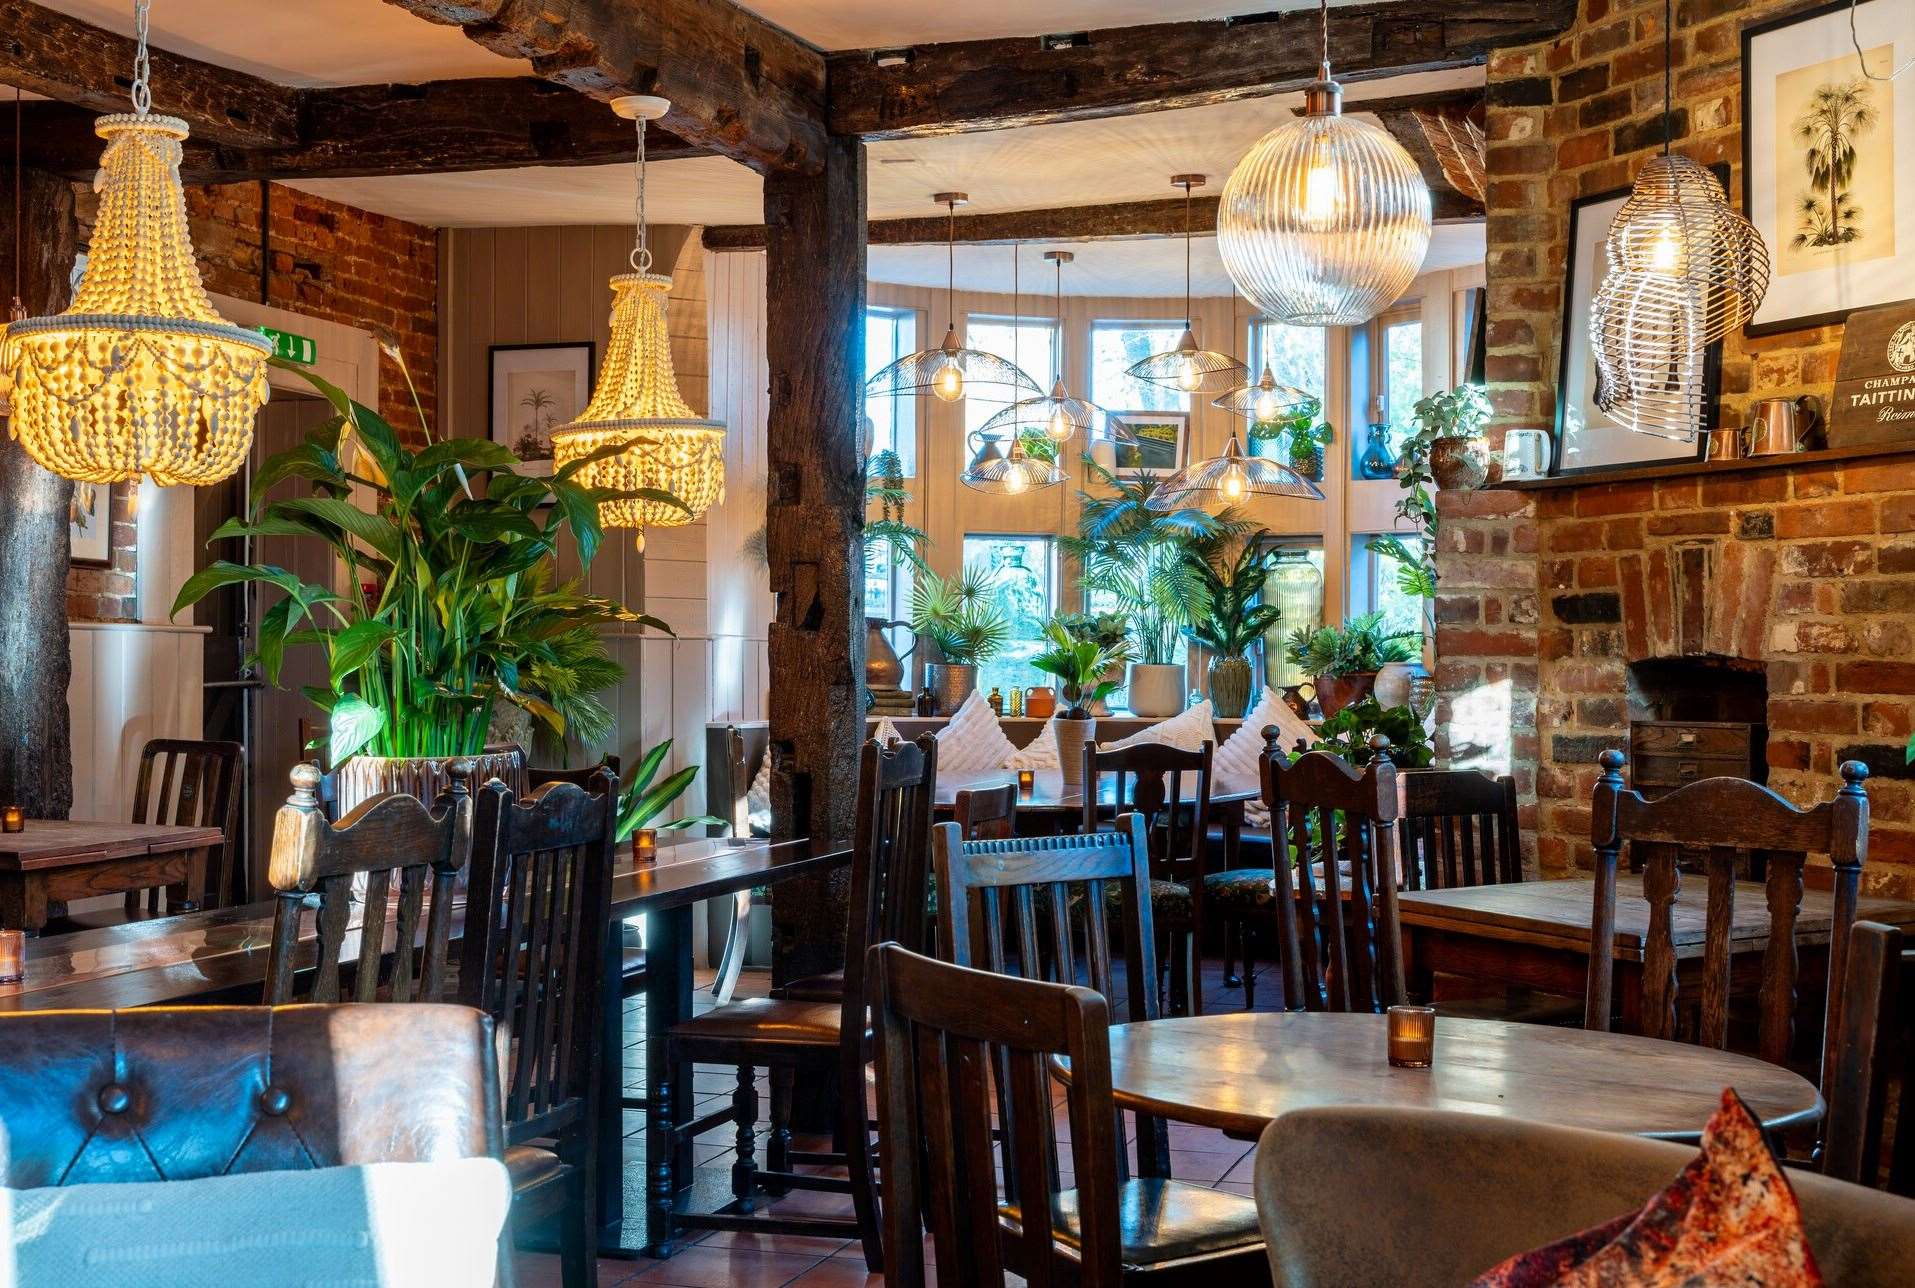 The Woolpack at Chilham has re-opened after an extensive refurbishment